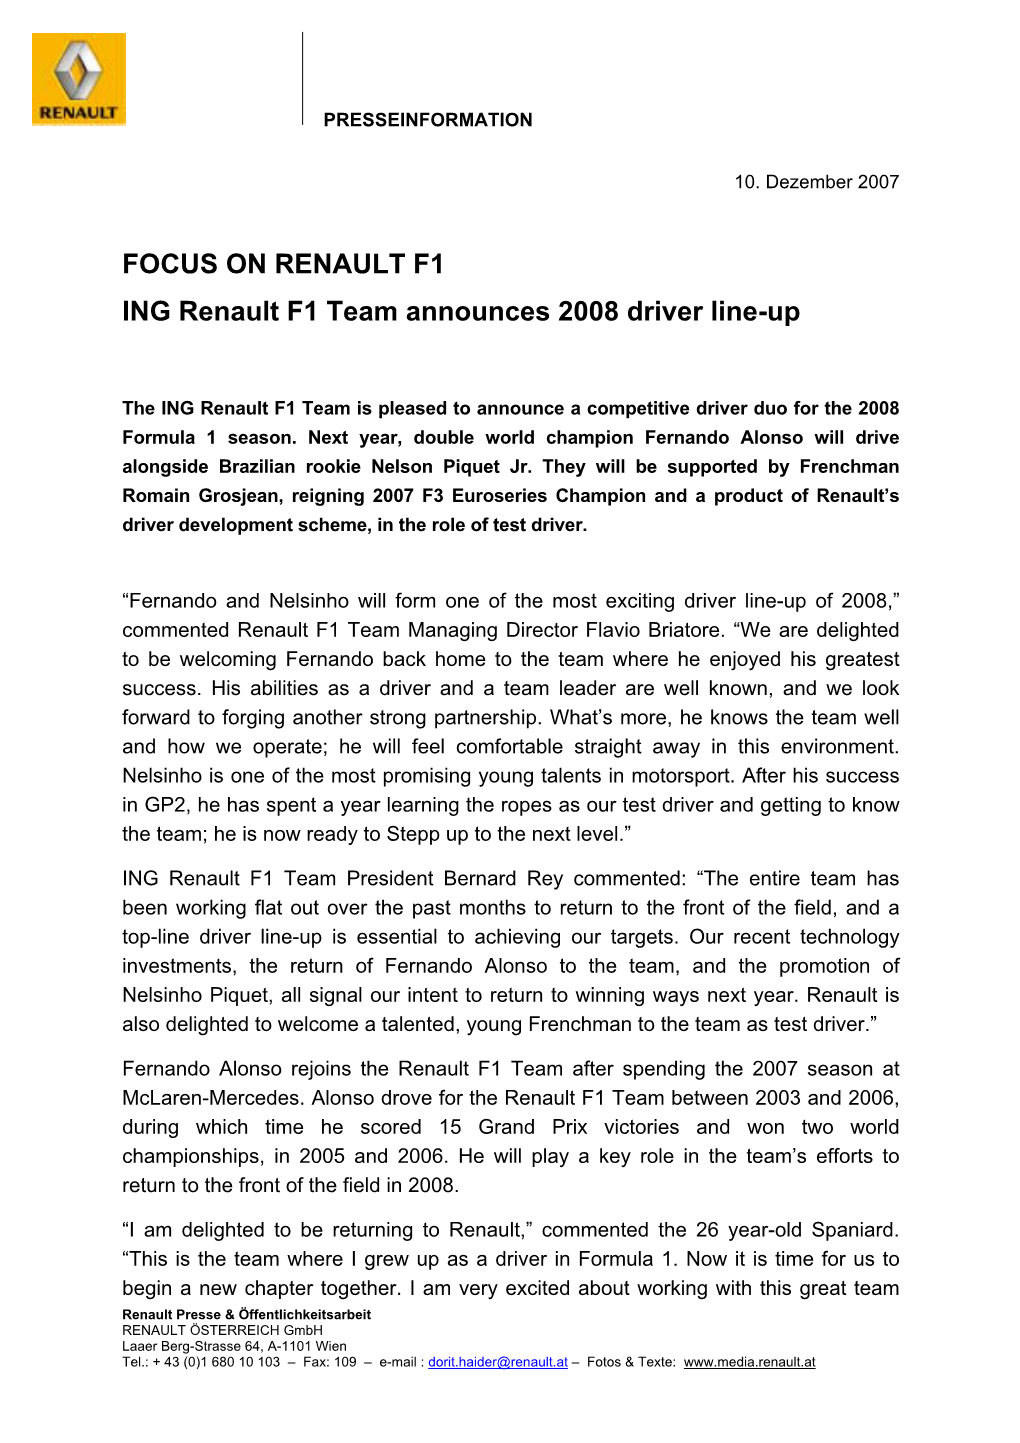 FOCUS on RENAULT F1 ING Renault F1 Team Announces 2008 Driver Line-Up